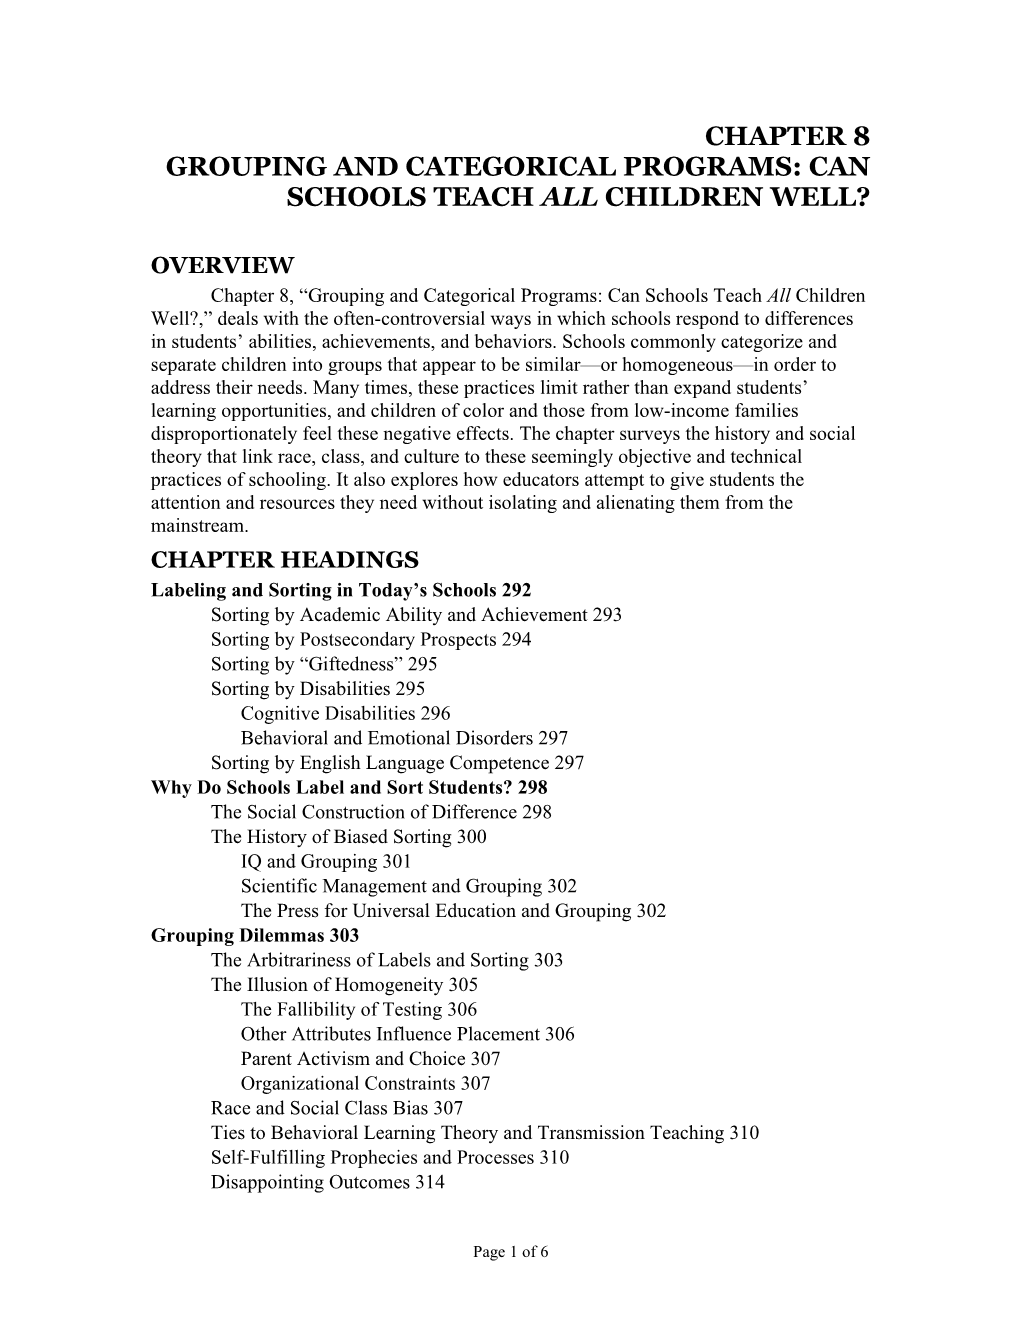 Grouping and Categorical Programs: Can Schools Teach All Children Well?